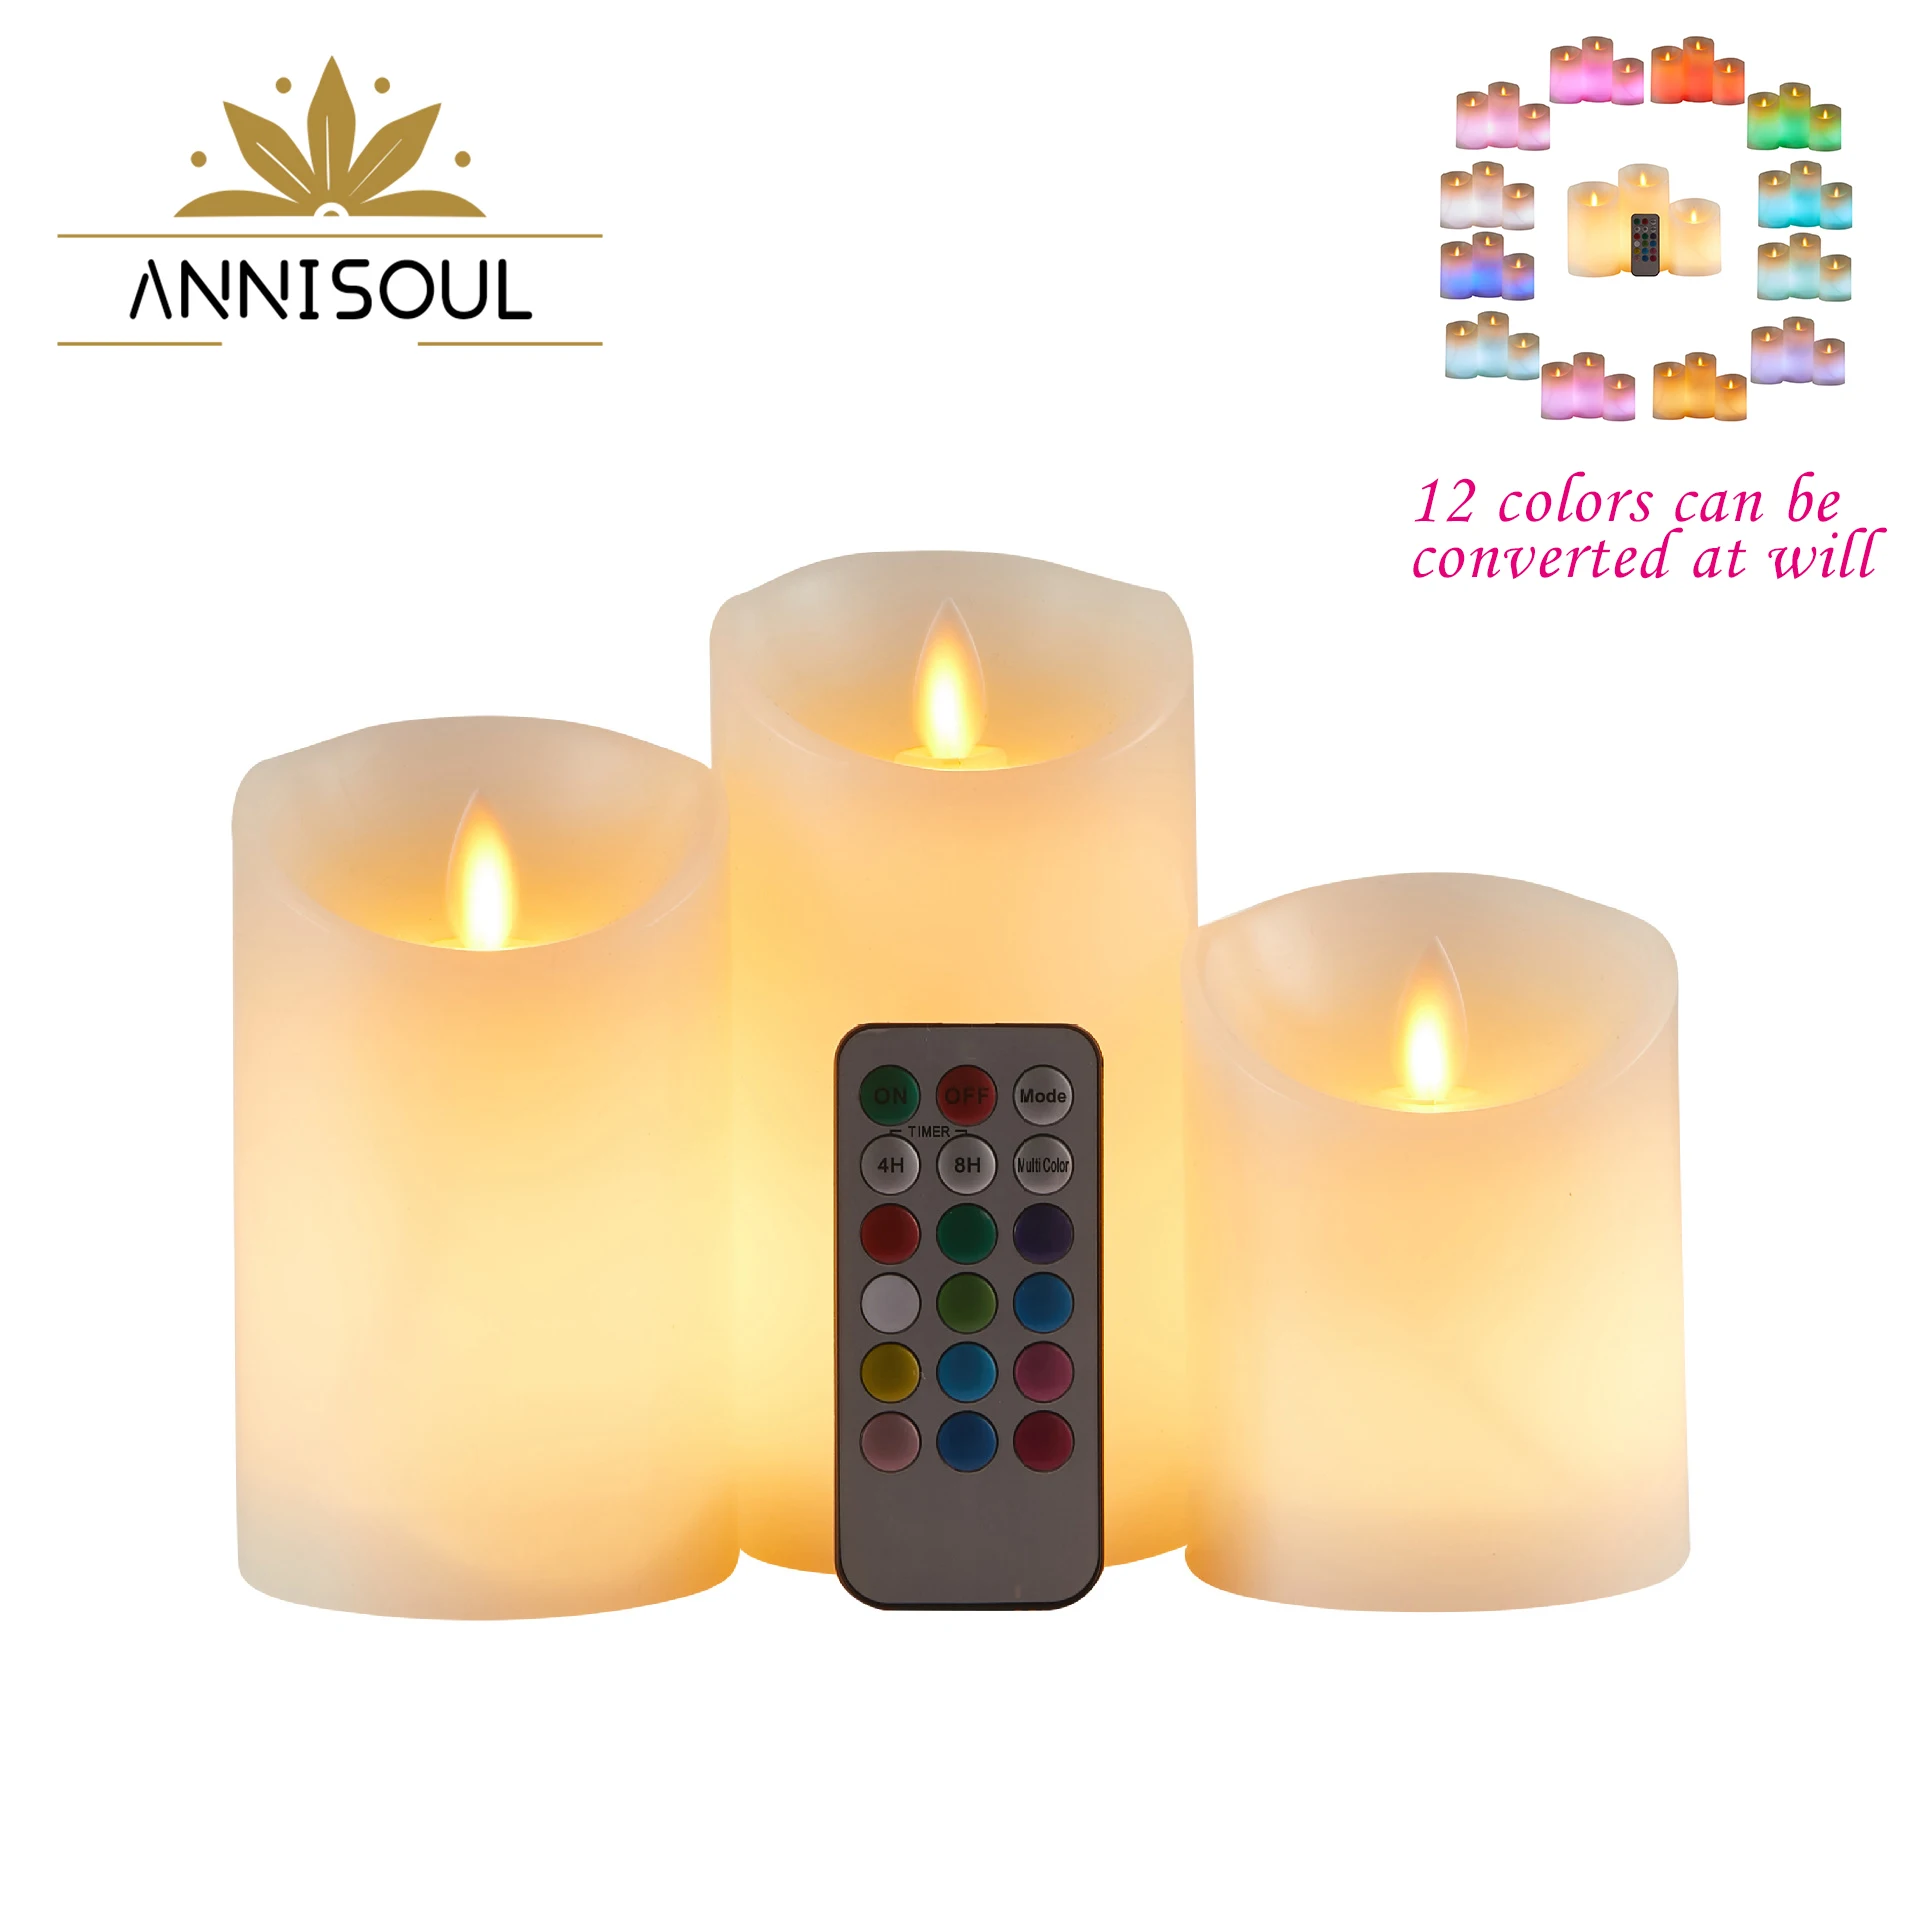 ANNISOUL LED Candle Light 3ps/set 12 Colors Flame Remote Control Electronic Glass Candle For Home Decoration Wedding Birthday